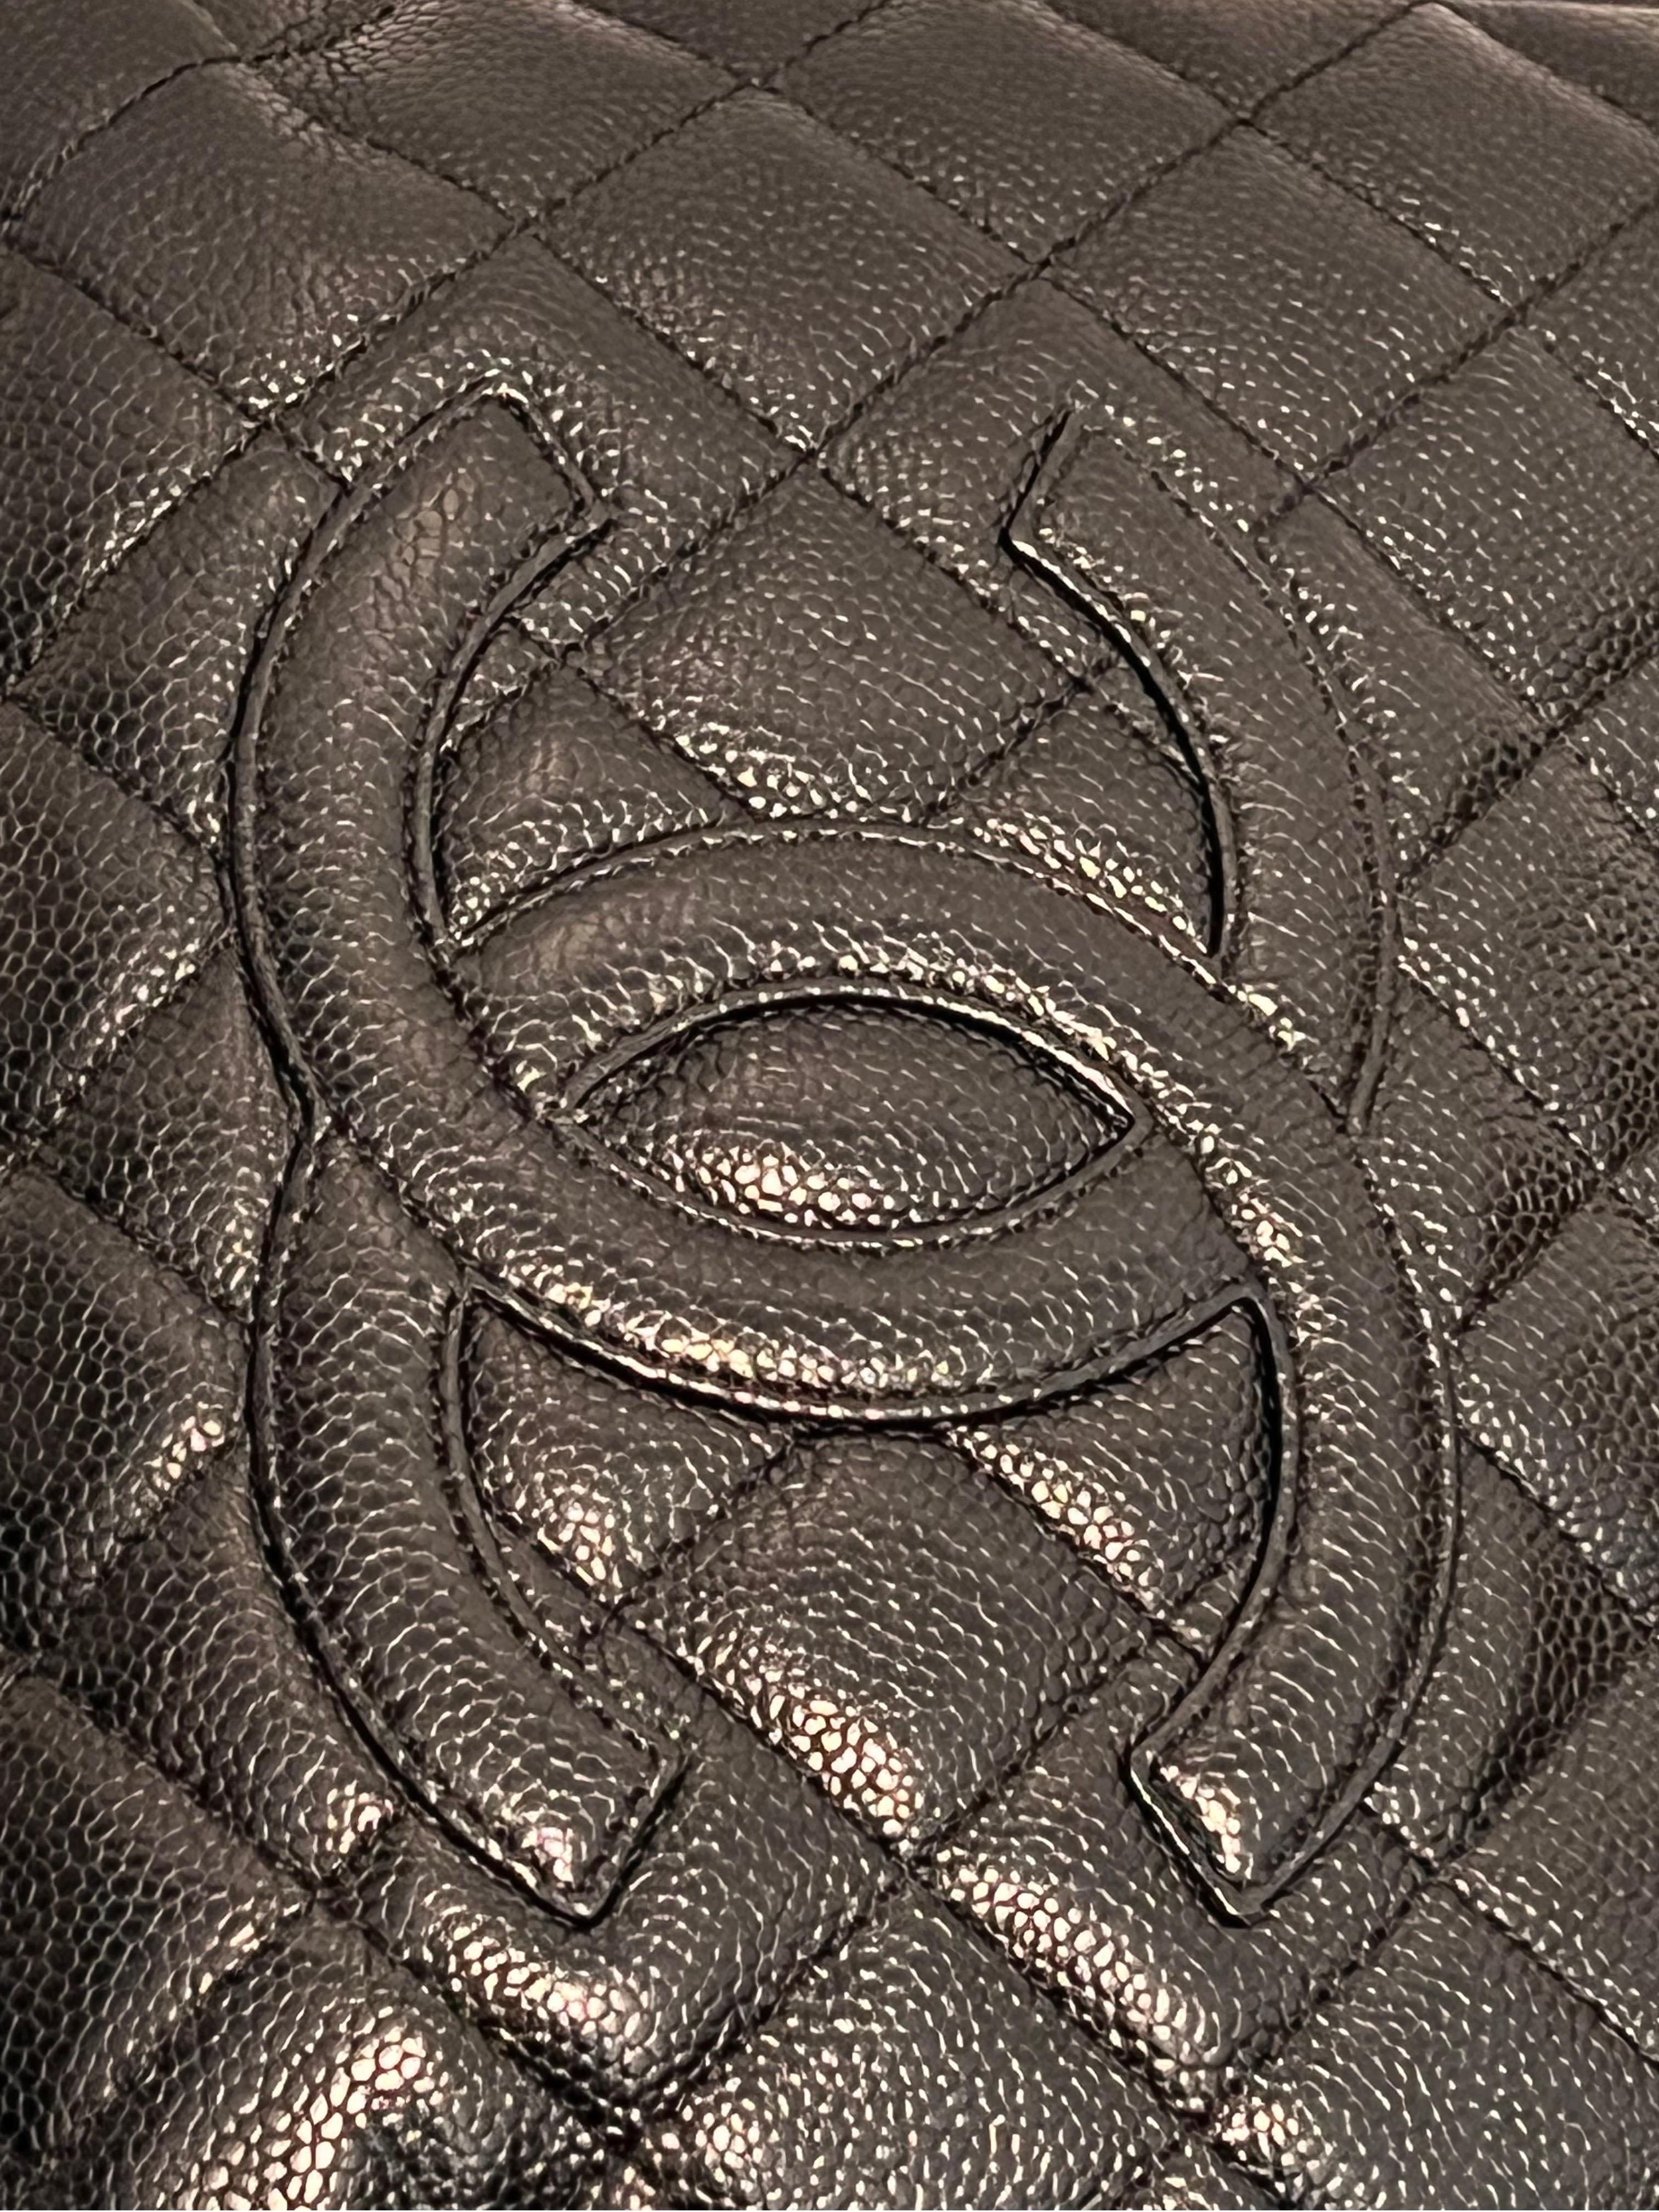 Chanel Black Quilted Caviar Leather Grand Shopping Tote 8